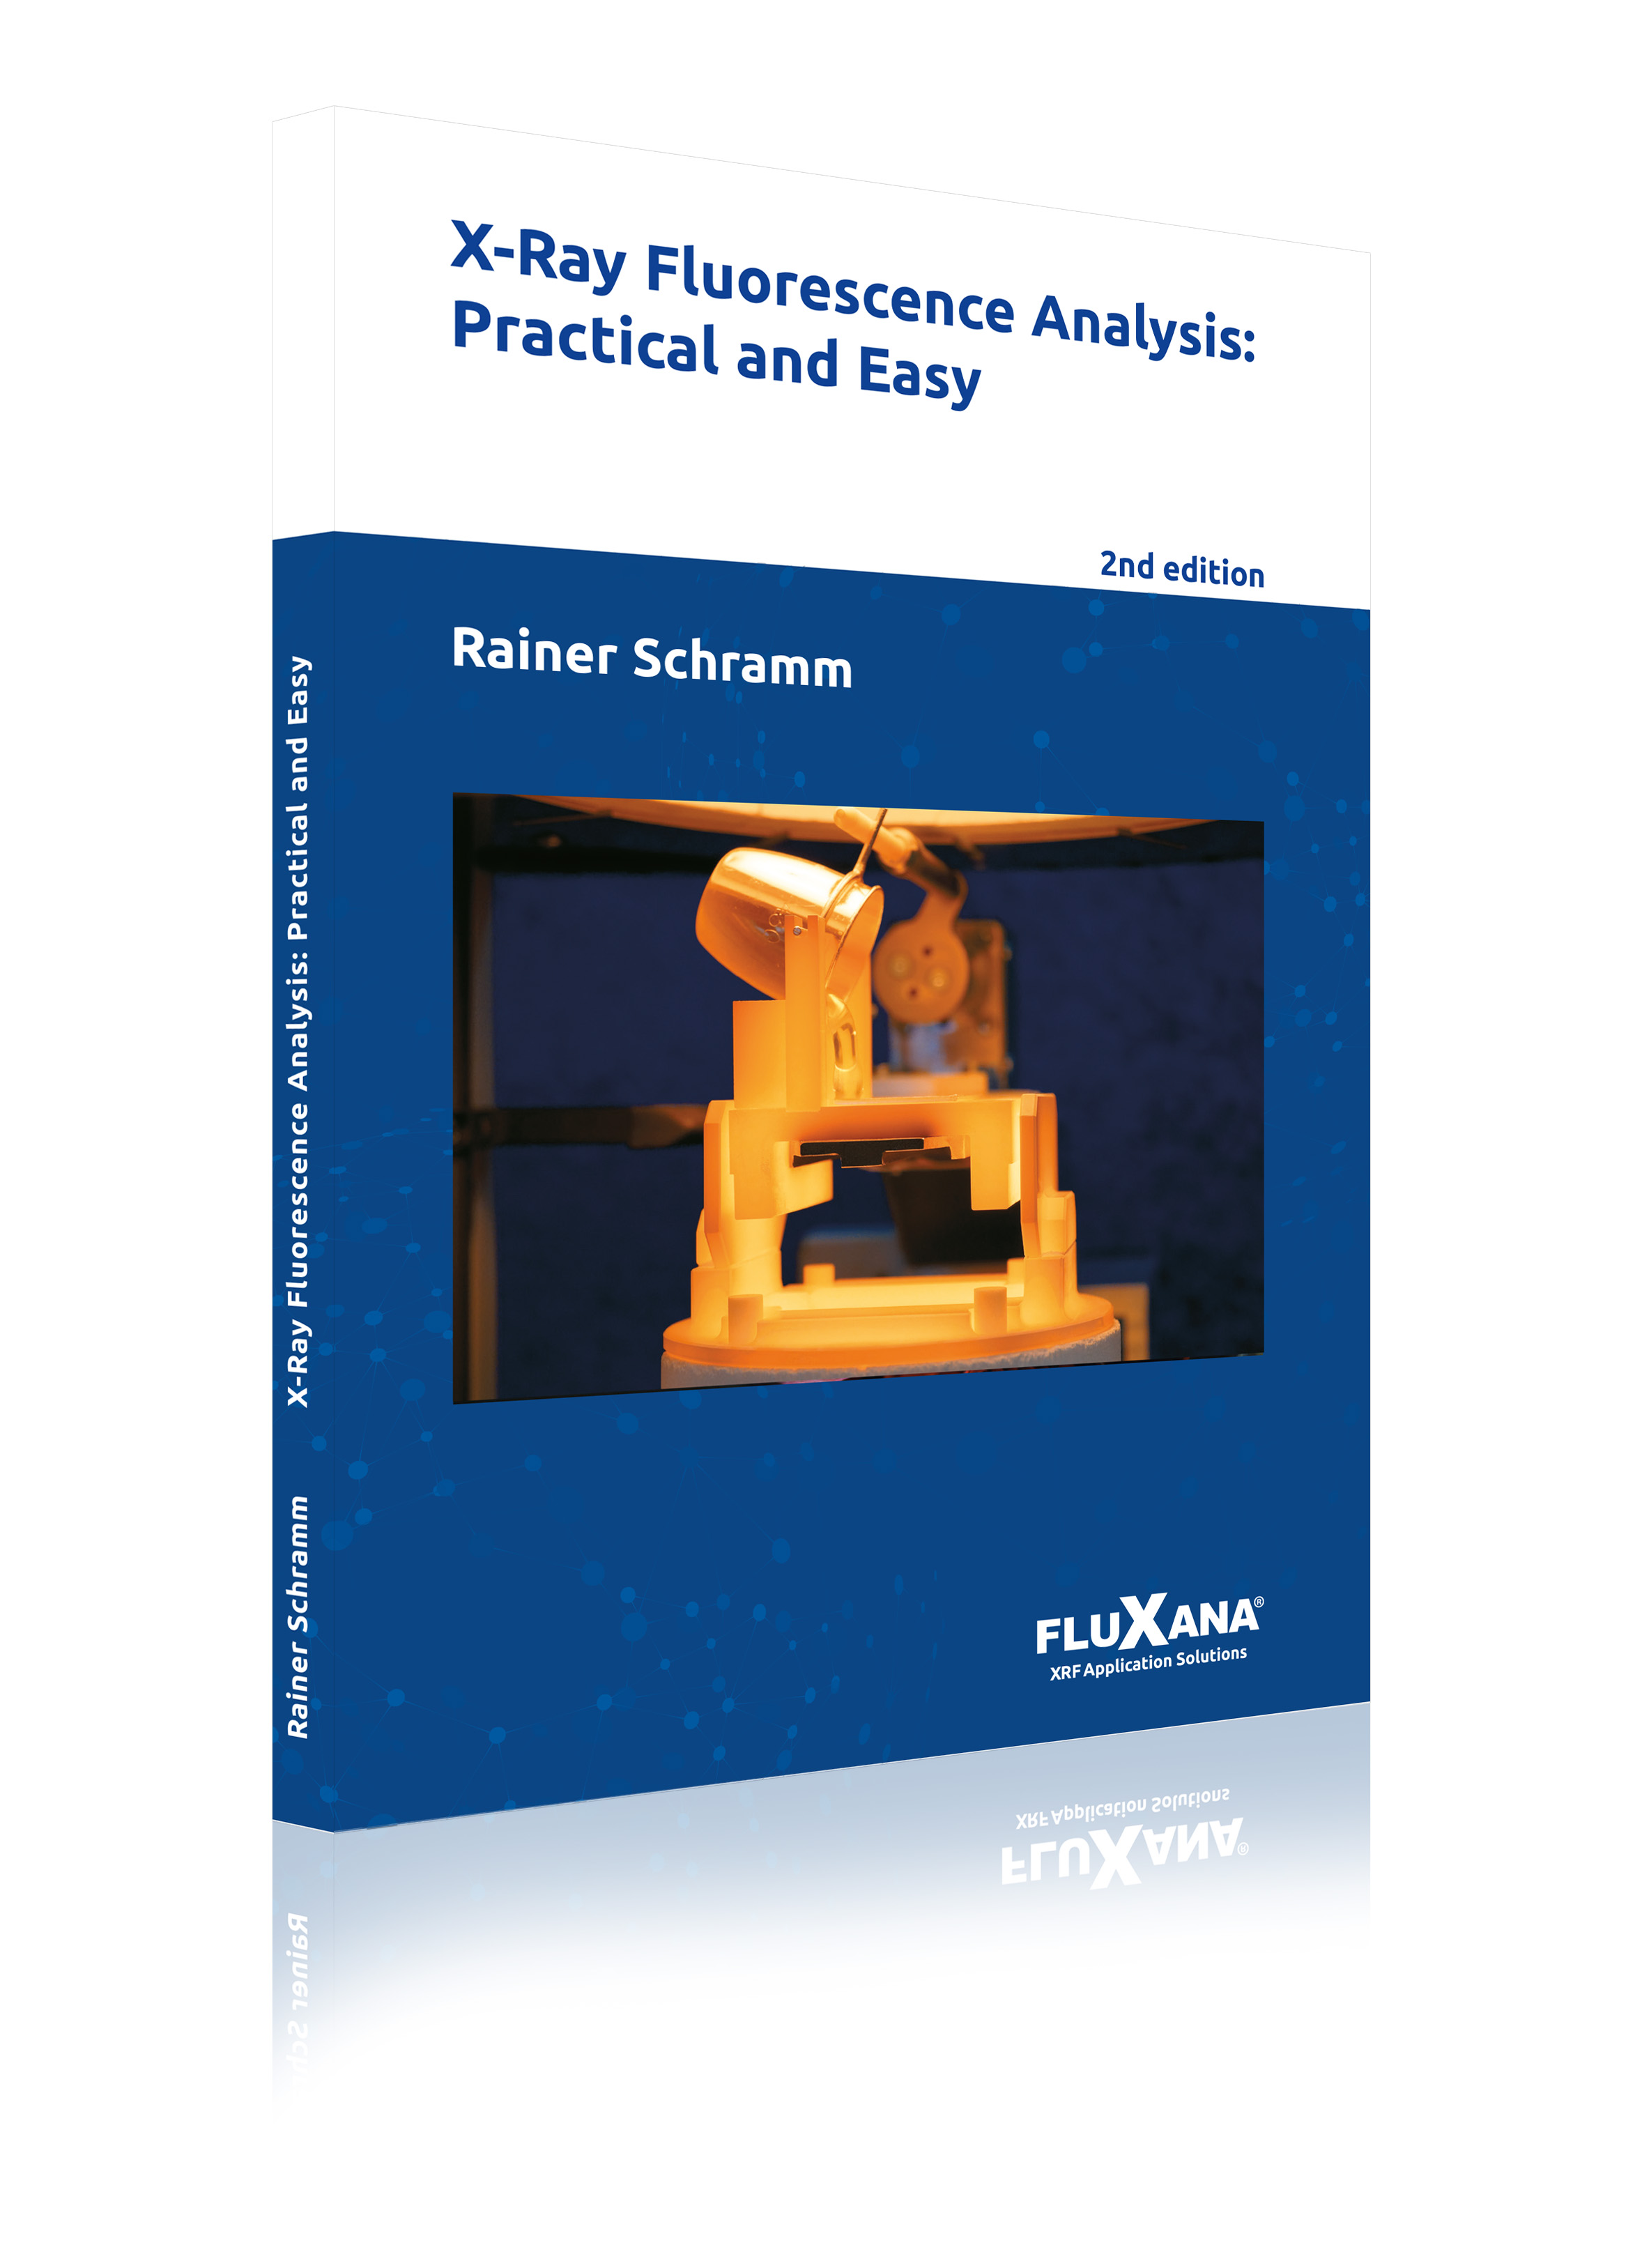 Book X-ray Fluorescence Analysis Practical and Easy